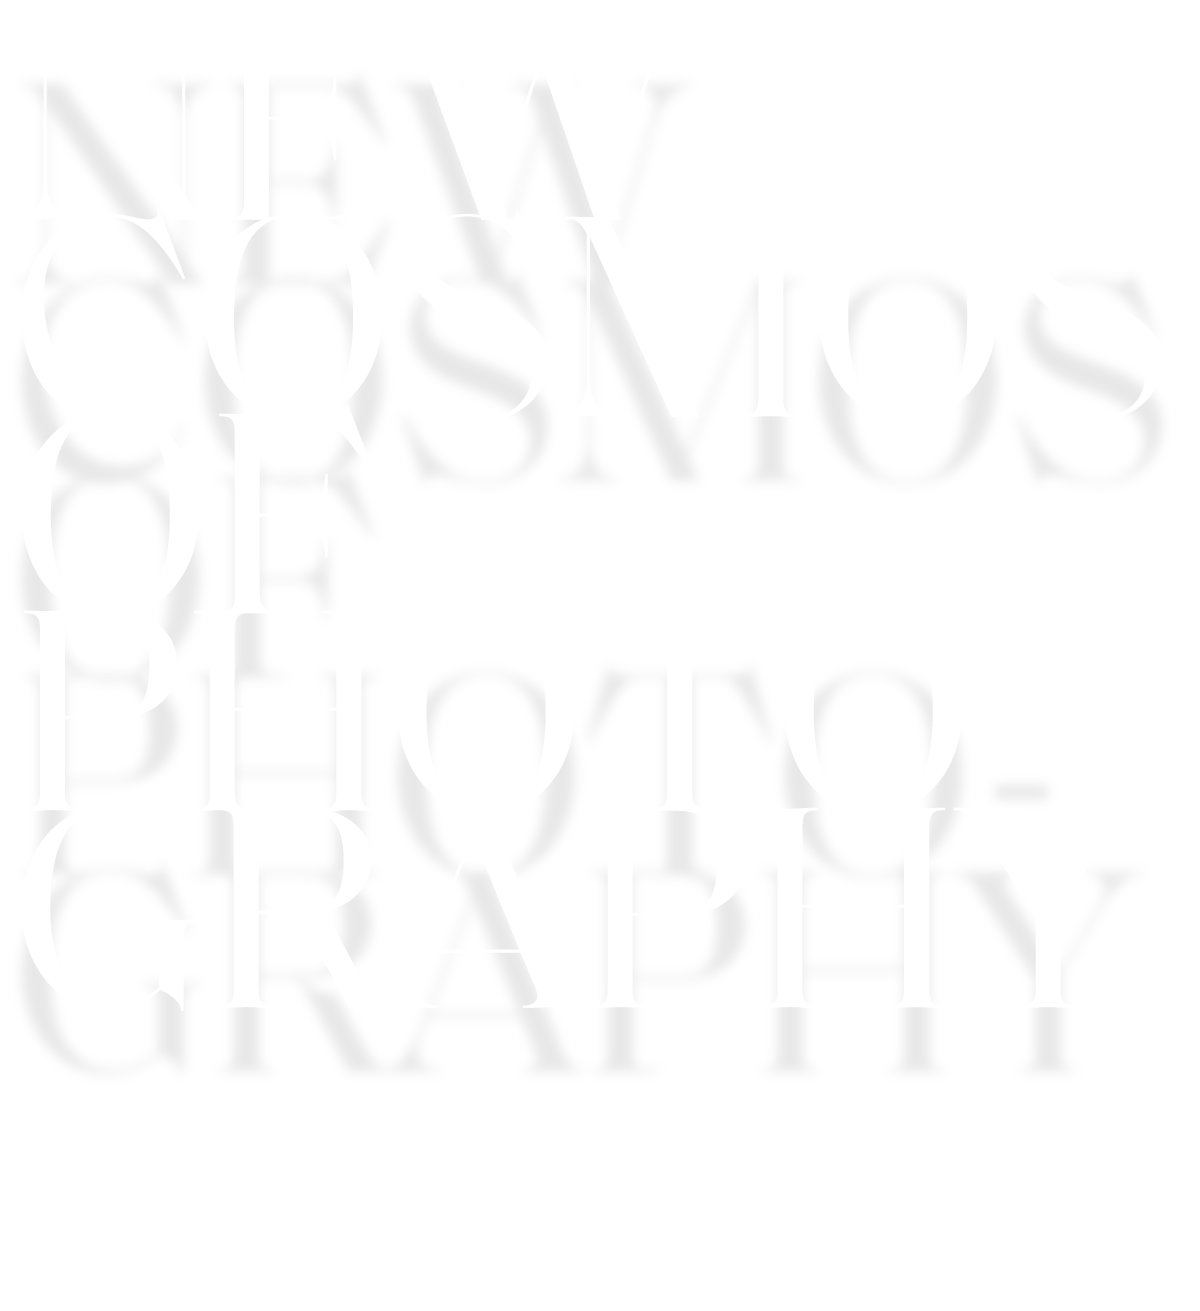 2021 [44TH EDITION] GALLERY OF WINNING WORKS